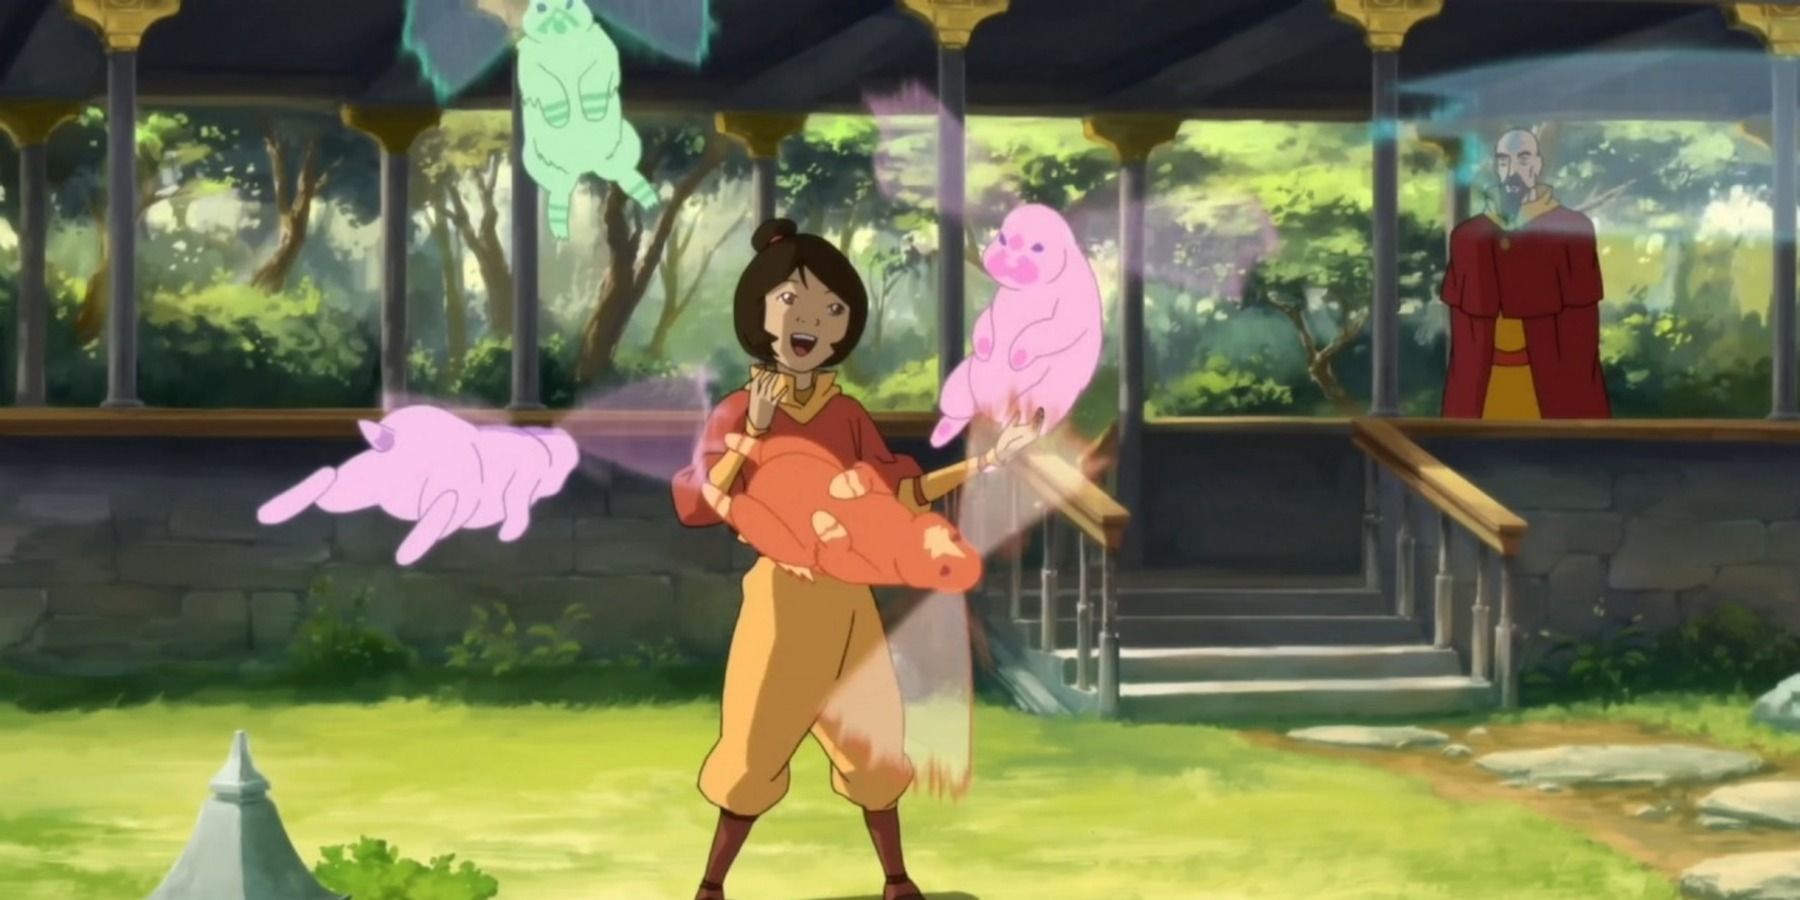 Jinora Legend of Korra playing with spirit bunnies with Tenzin in the background